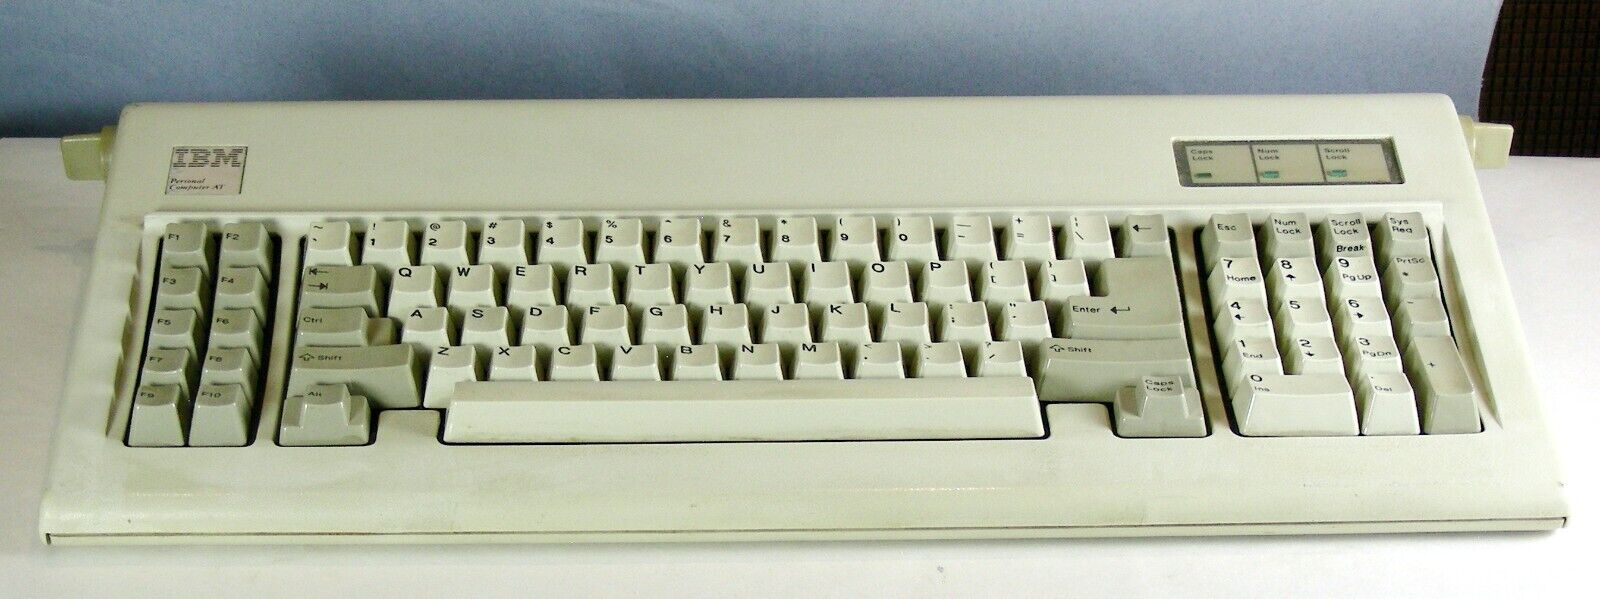 RARE Vintage IBM Personal Computer AT Model F Mechanical Clicky Keyboard